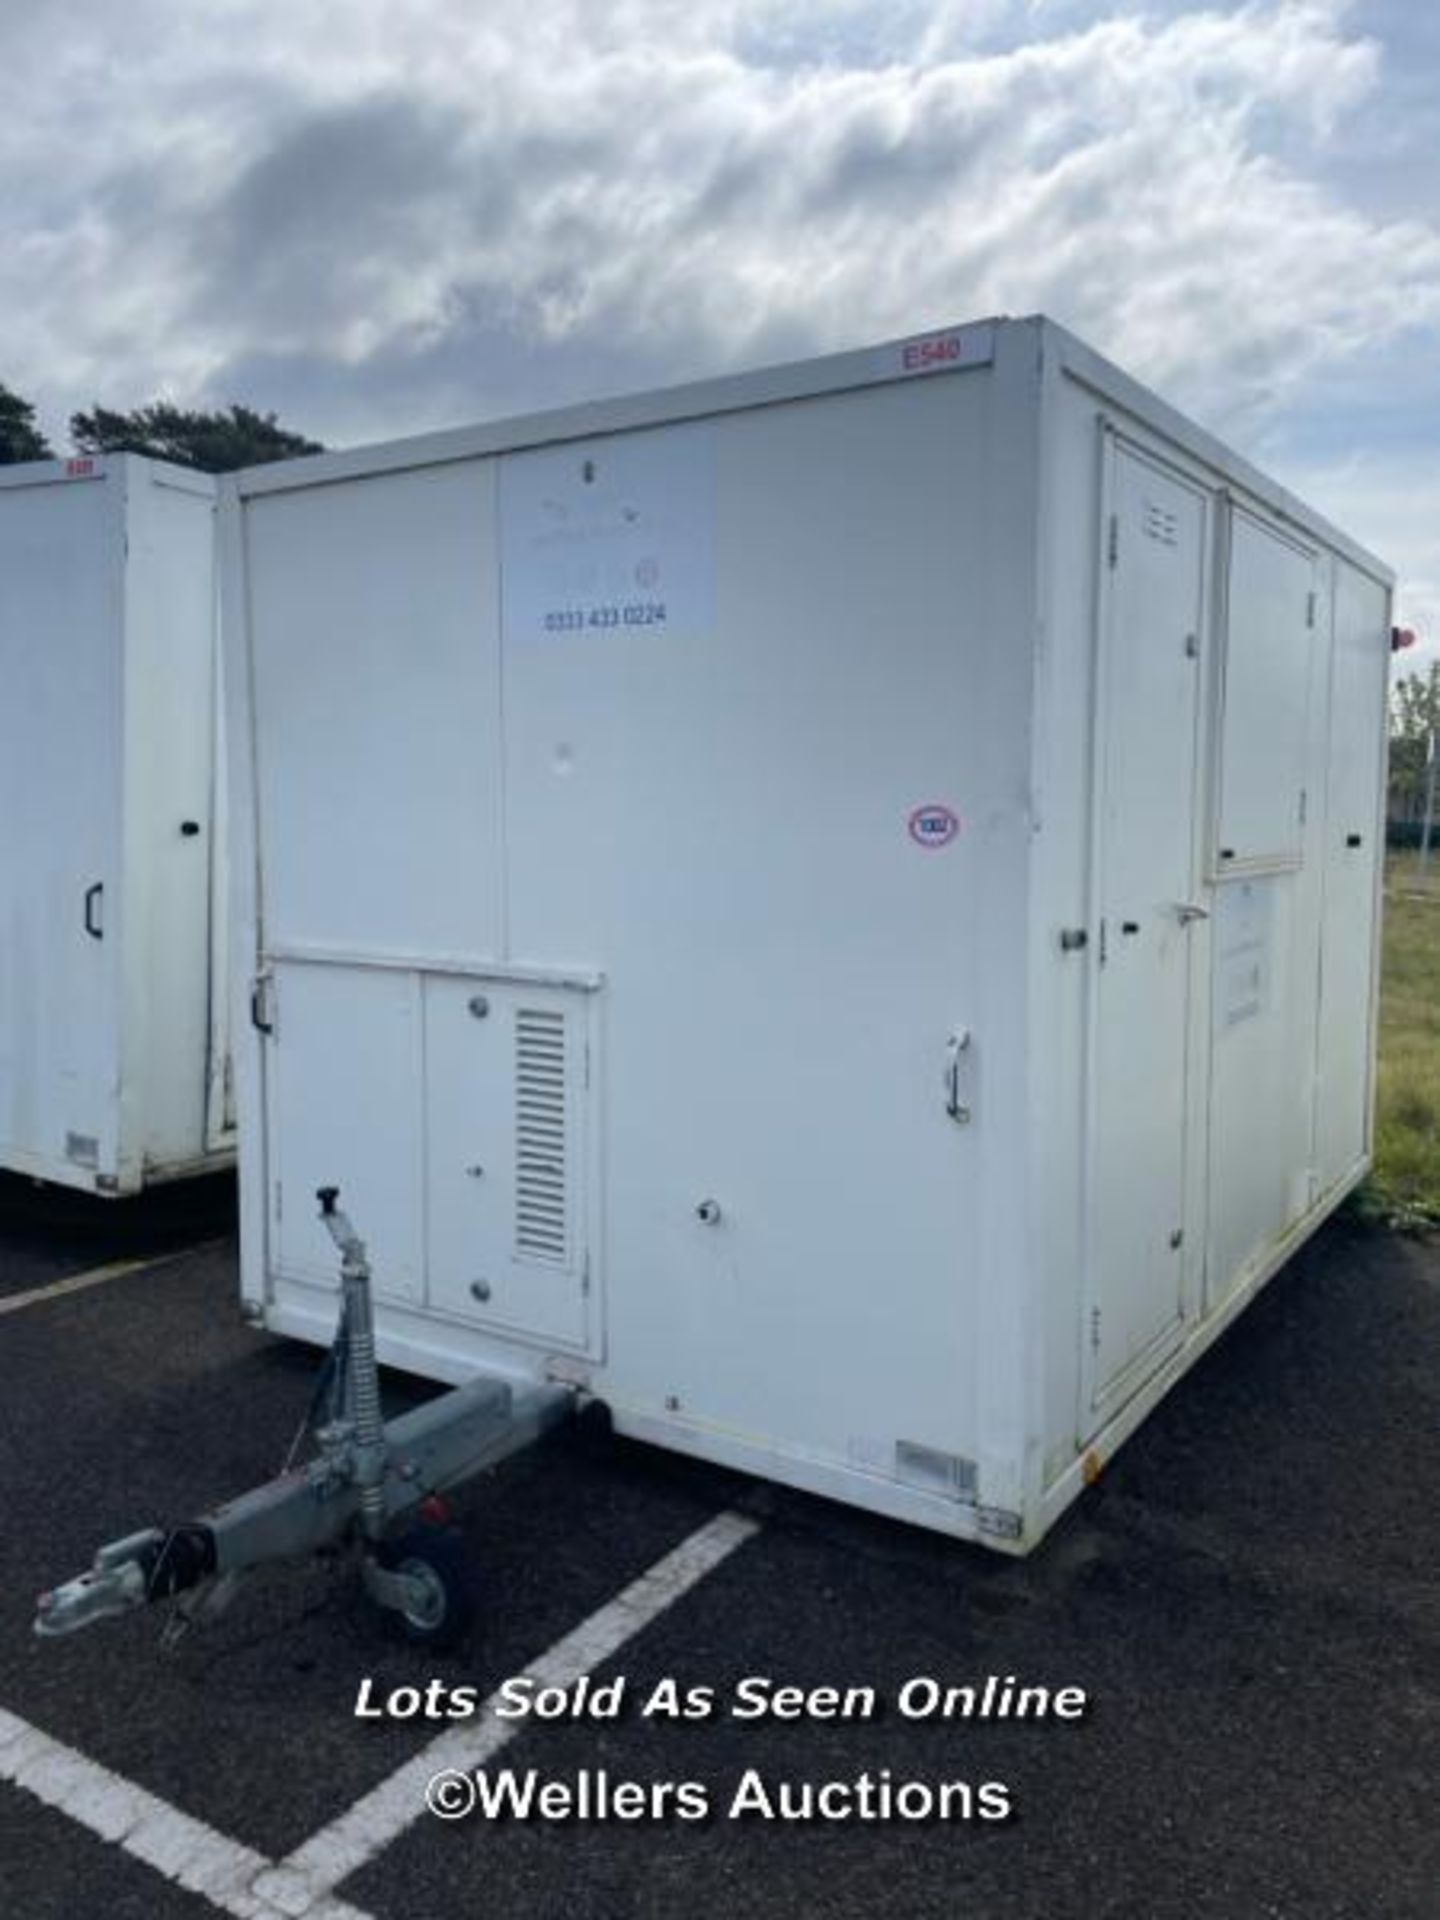 6 PERSON 12 X 7.5FT AJC EASY CABIN TOWABLE WELFARE UNIT, INCLUDES WASH BASIN, KETTLE, MICROWAVE, - Image 3 of 18